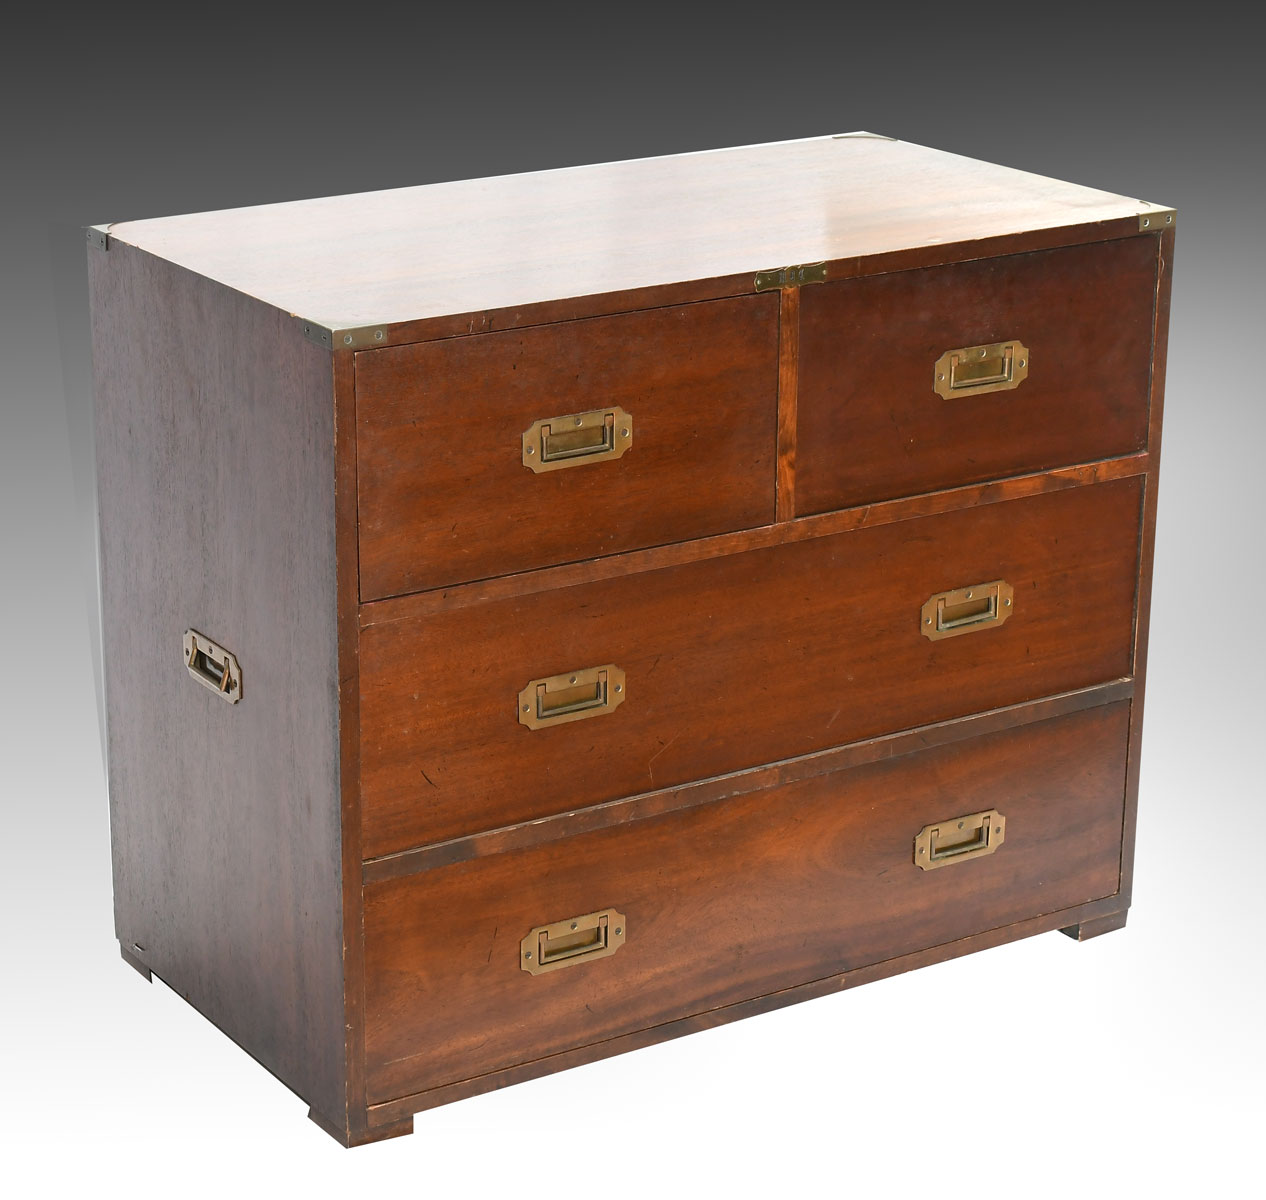 ENGLISH 4 DRAWER CAMPAIGN CHEST: